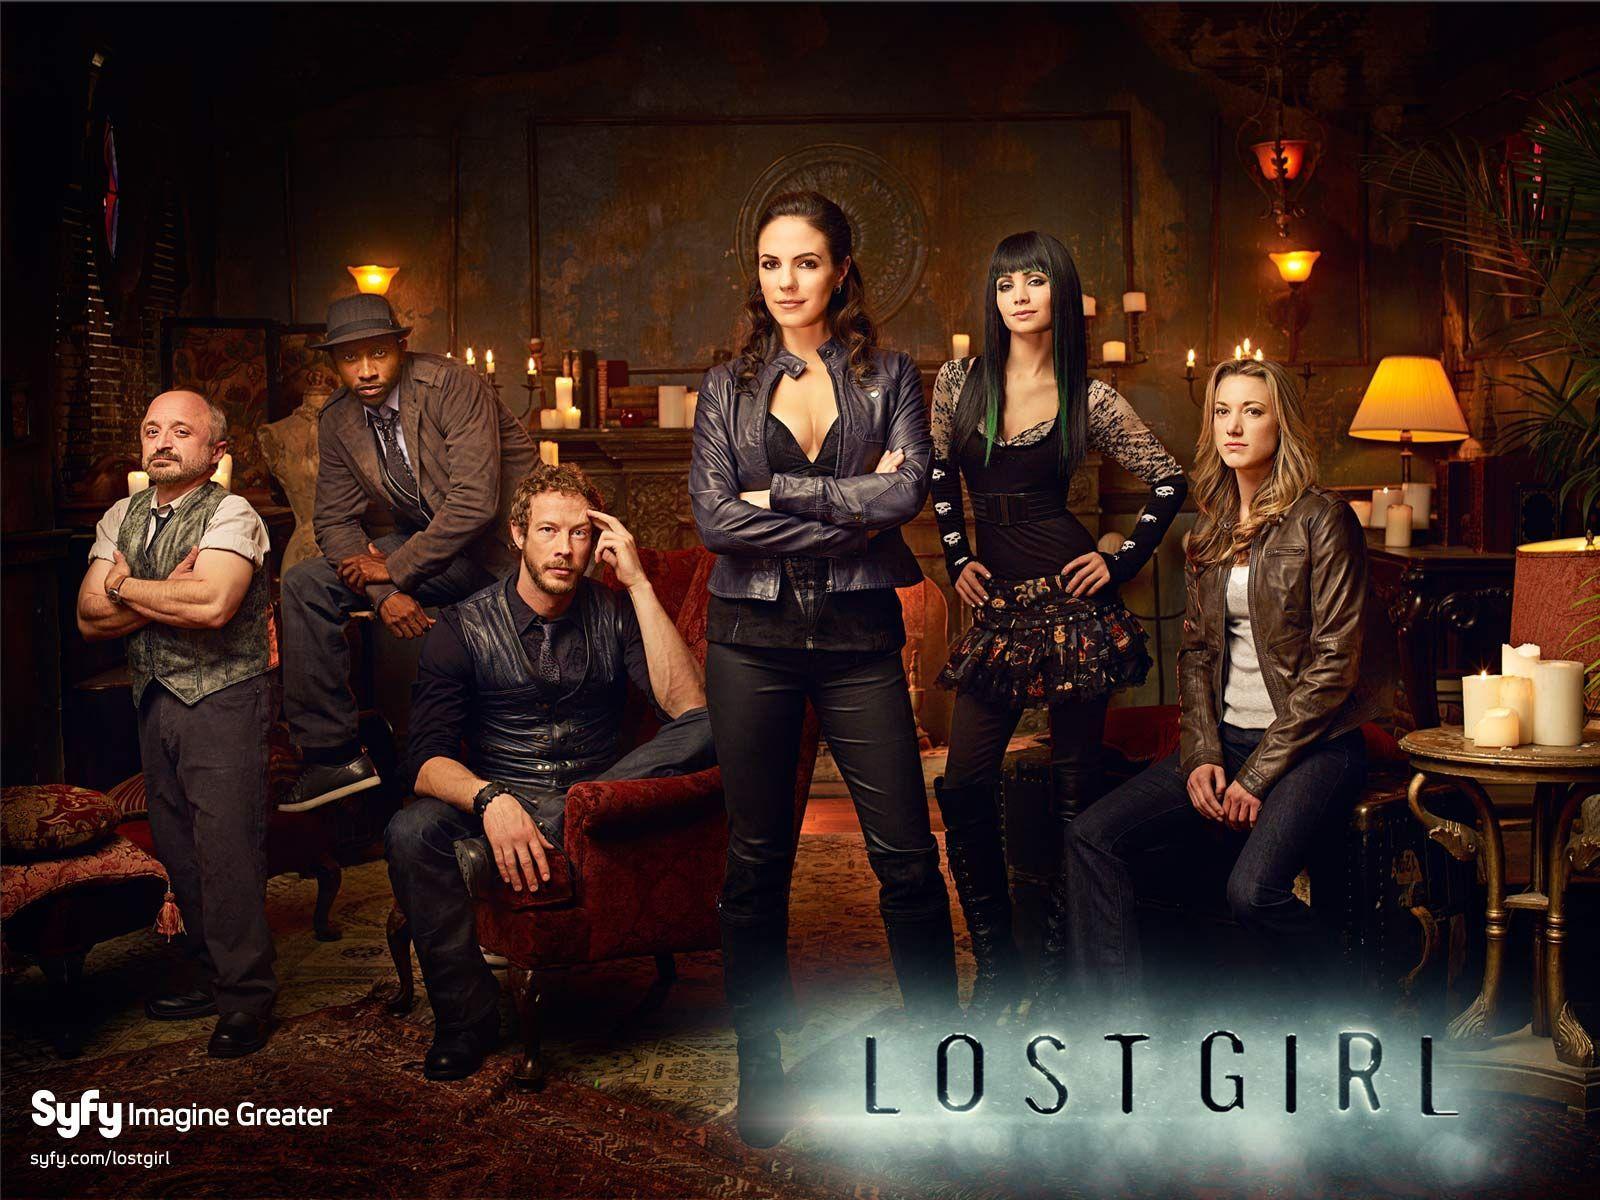 lost girl free